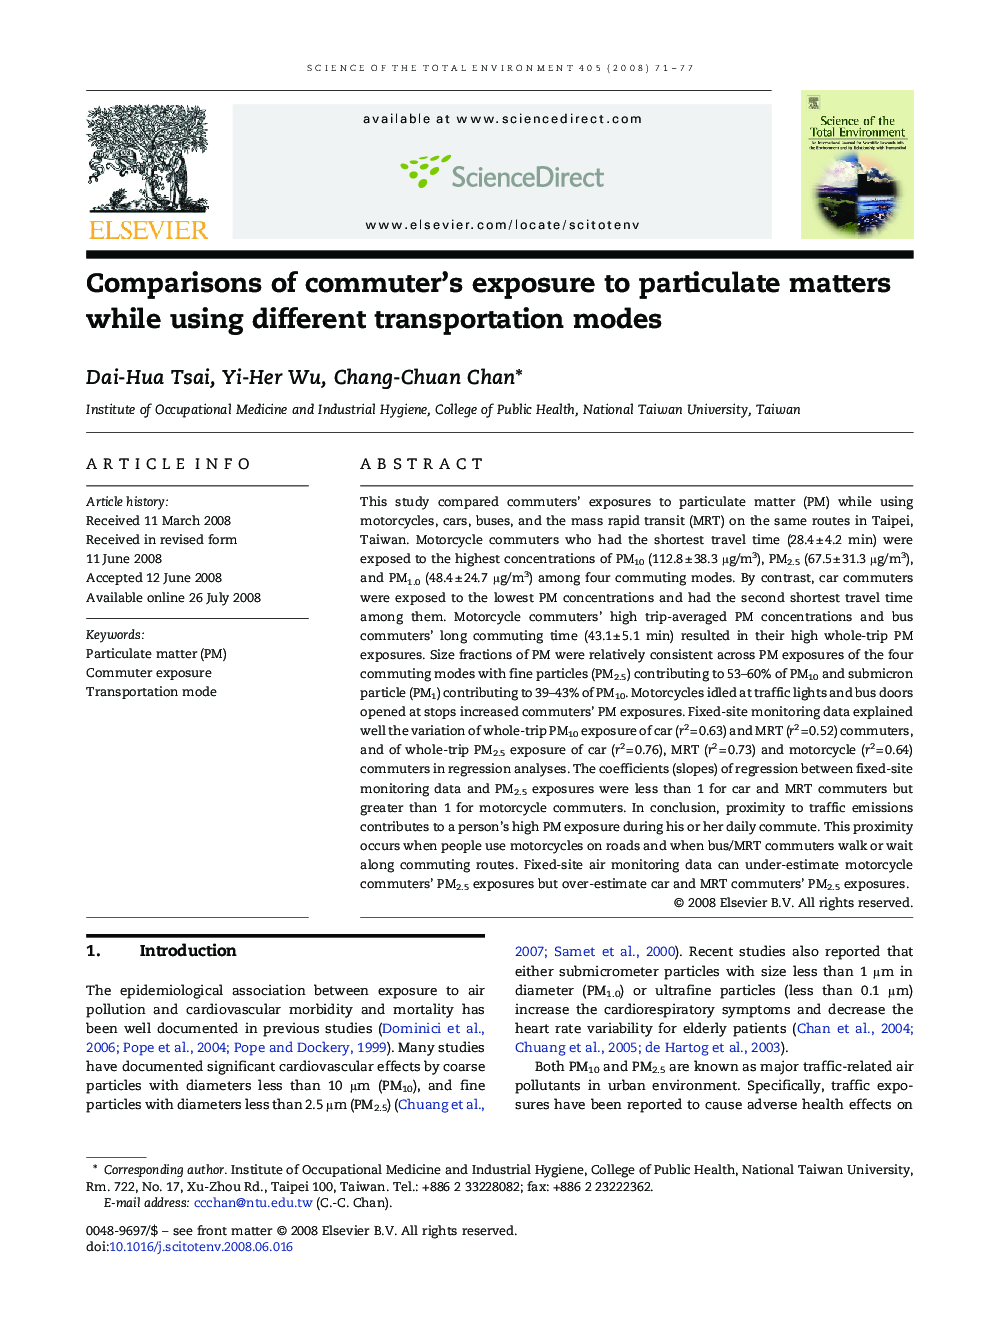 Comparisons of commuter's exposure to particulate matters while using different transportation modes